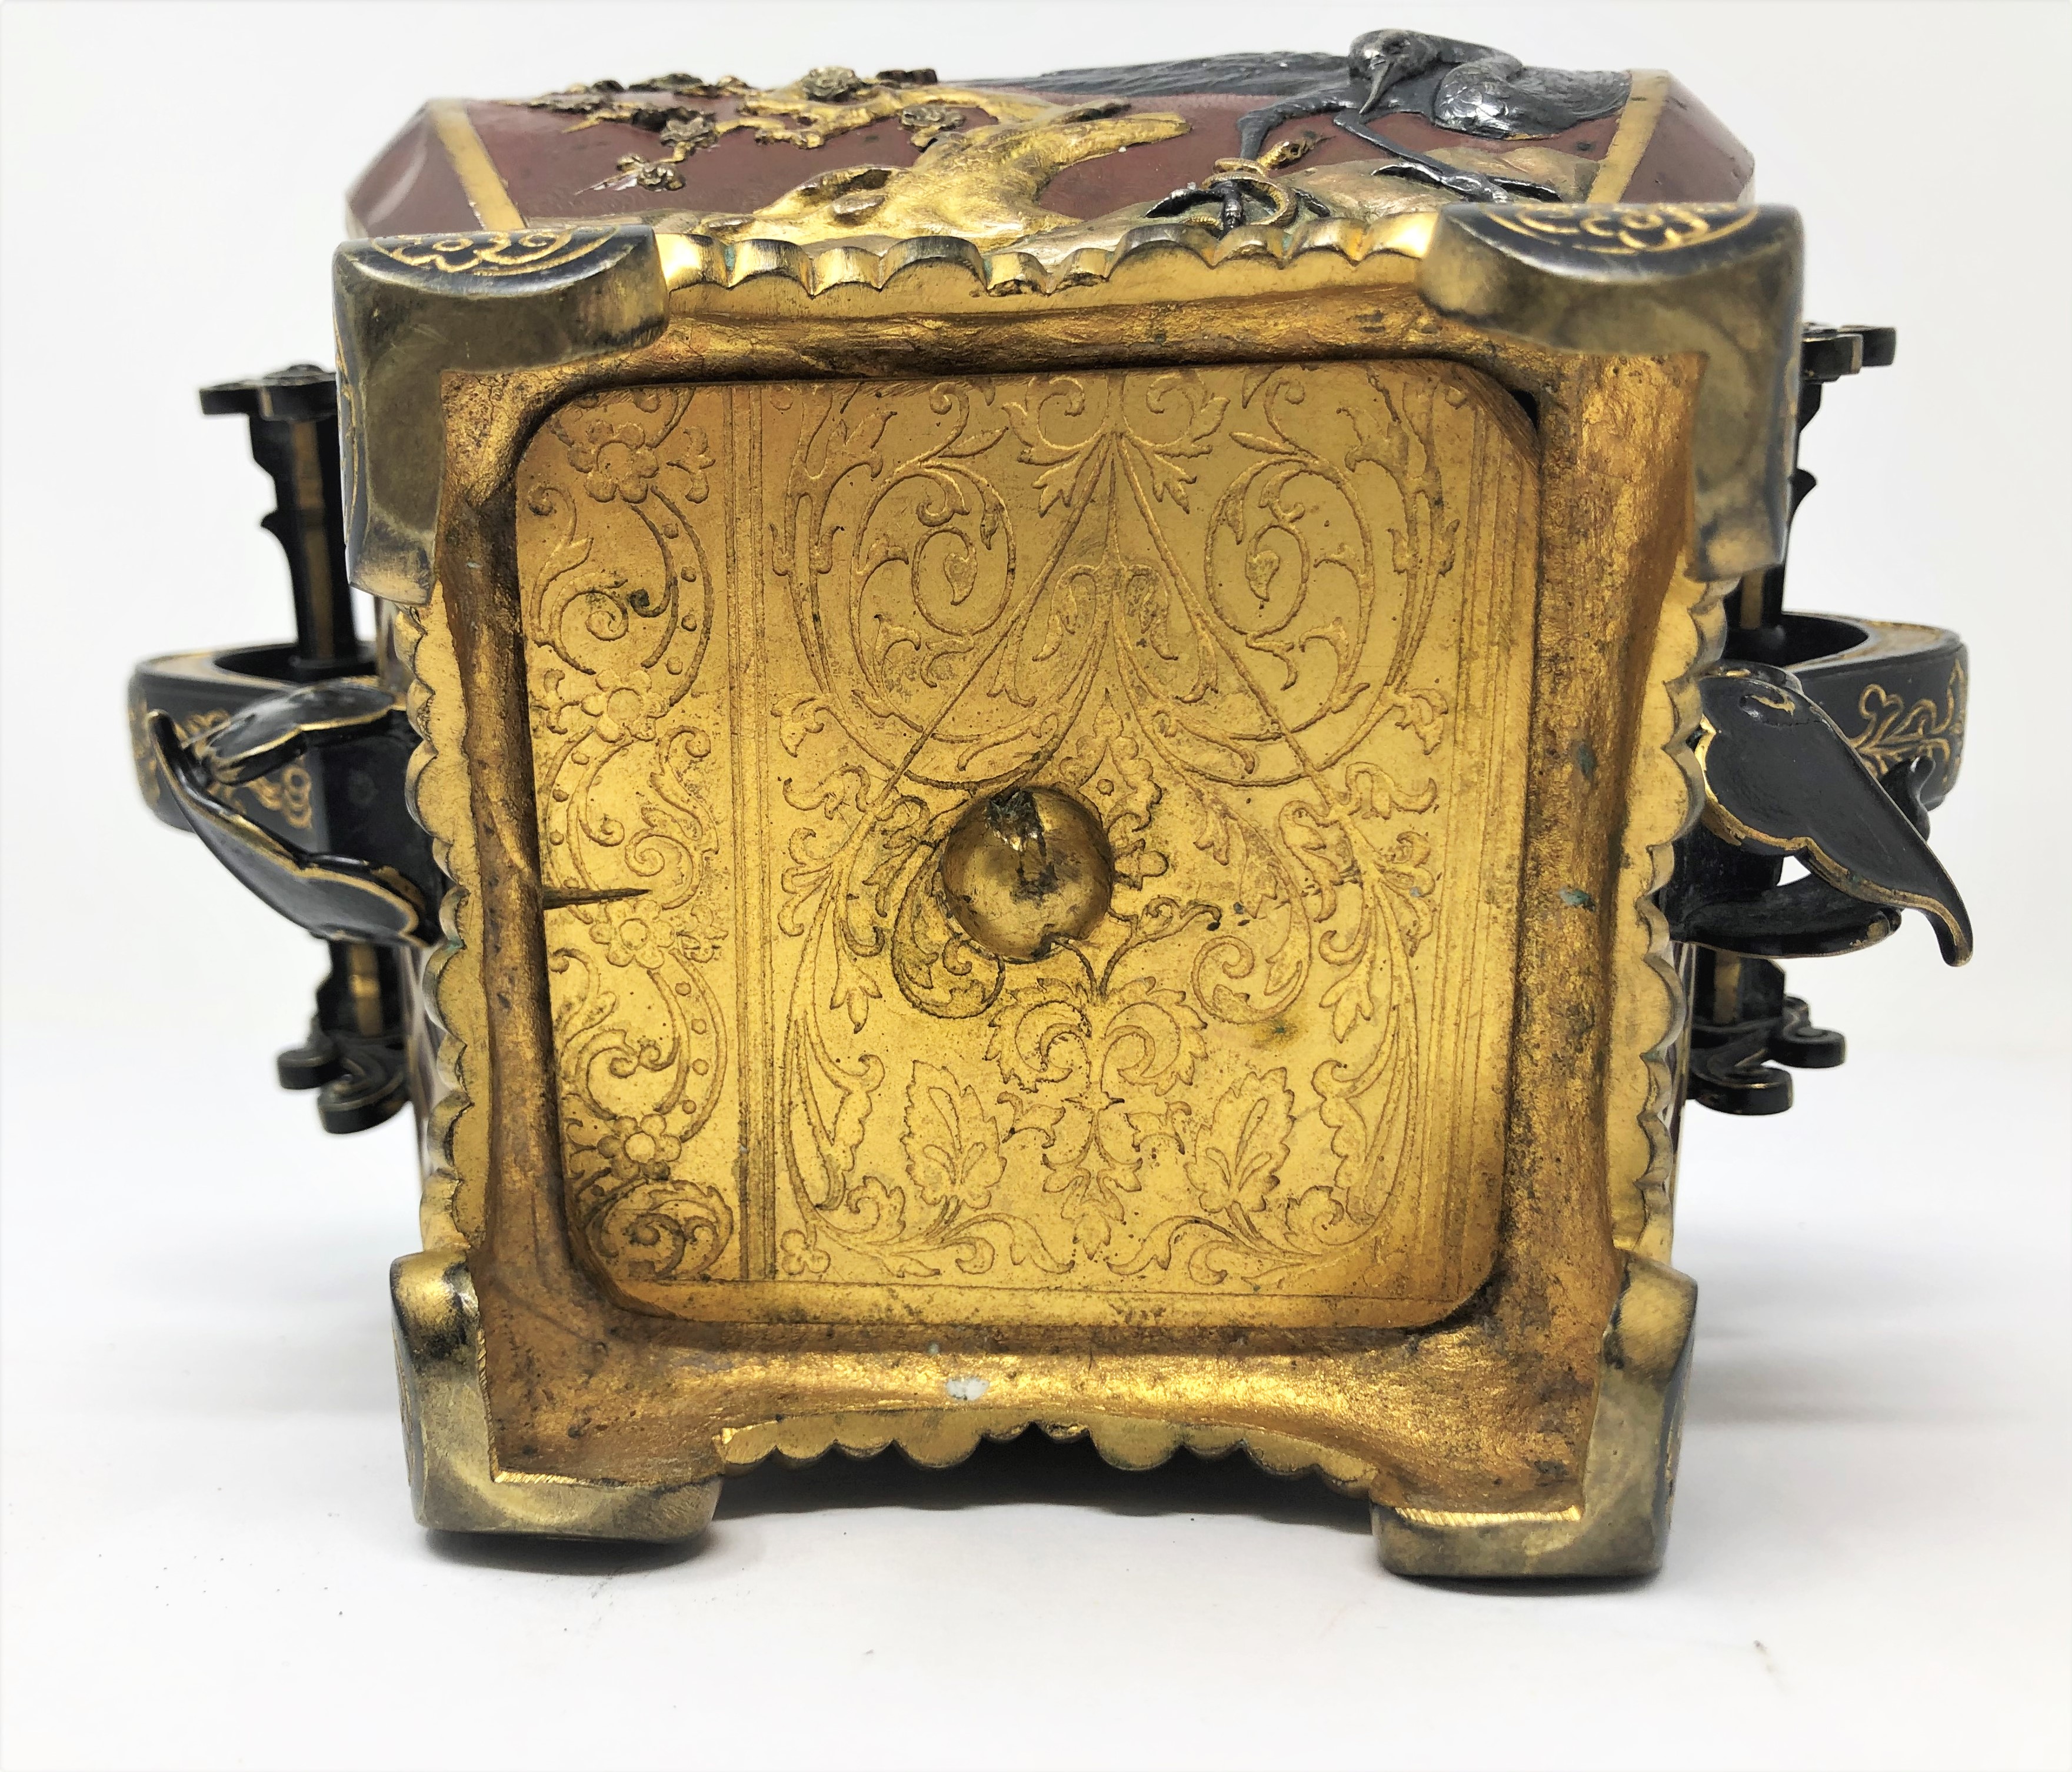 A JAPANESE MIXED METAL PARCEL-GILT KORO, MEIJI PERIOD (1868-1912) - Image 6 of 8